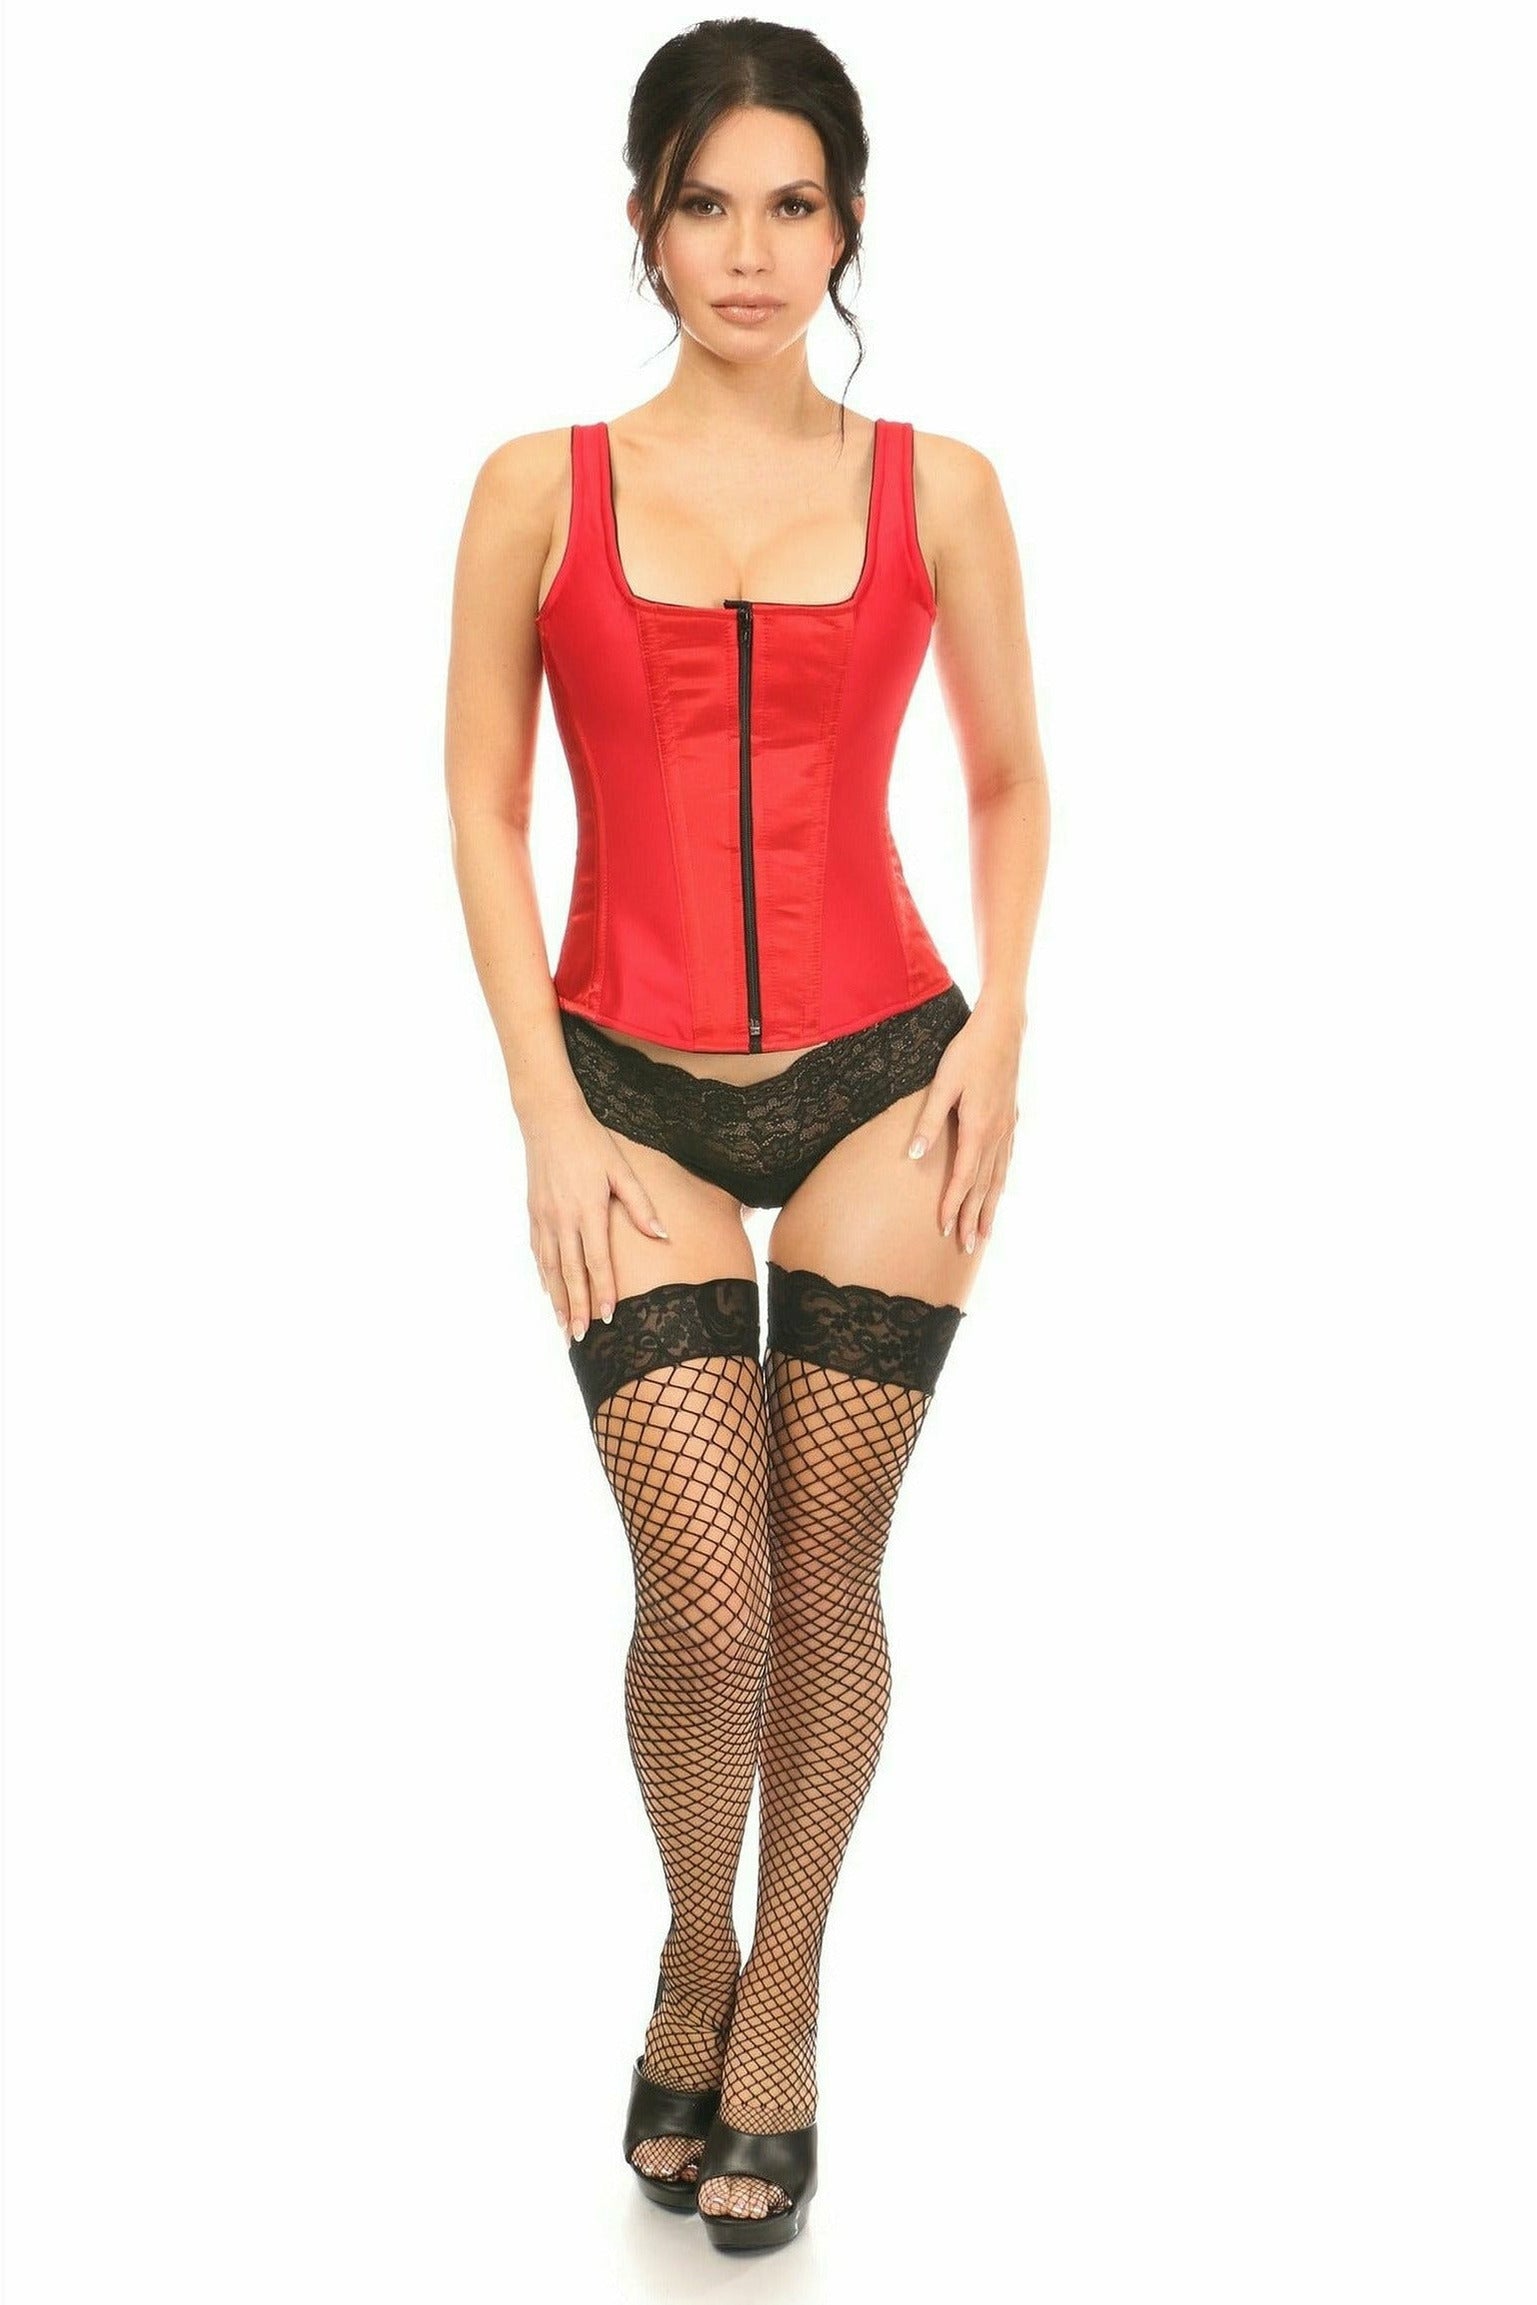 Daisy Corsets Top Drawer Red Satin Steel Boned Corset w/Straps - Flyclothing LLC